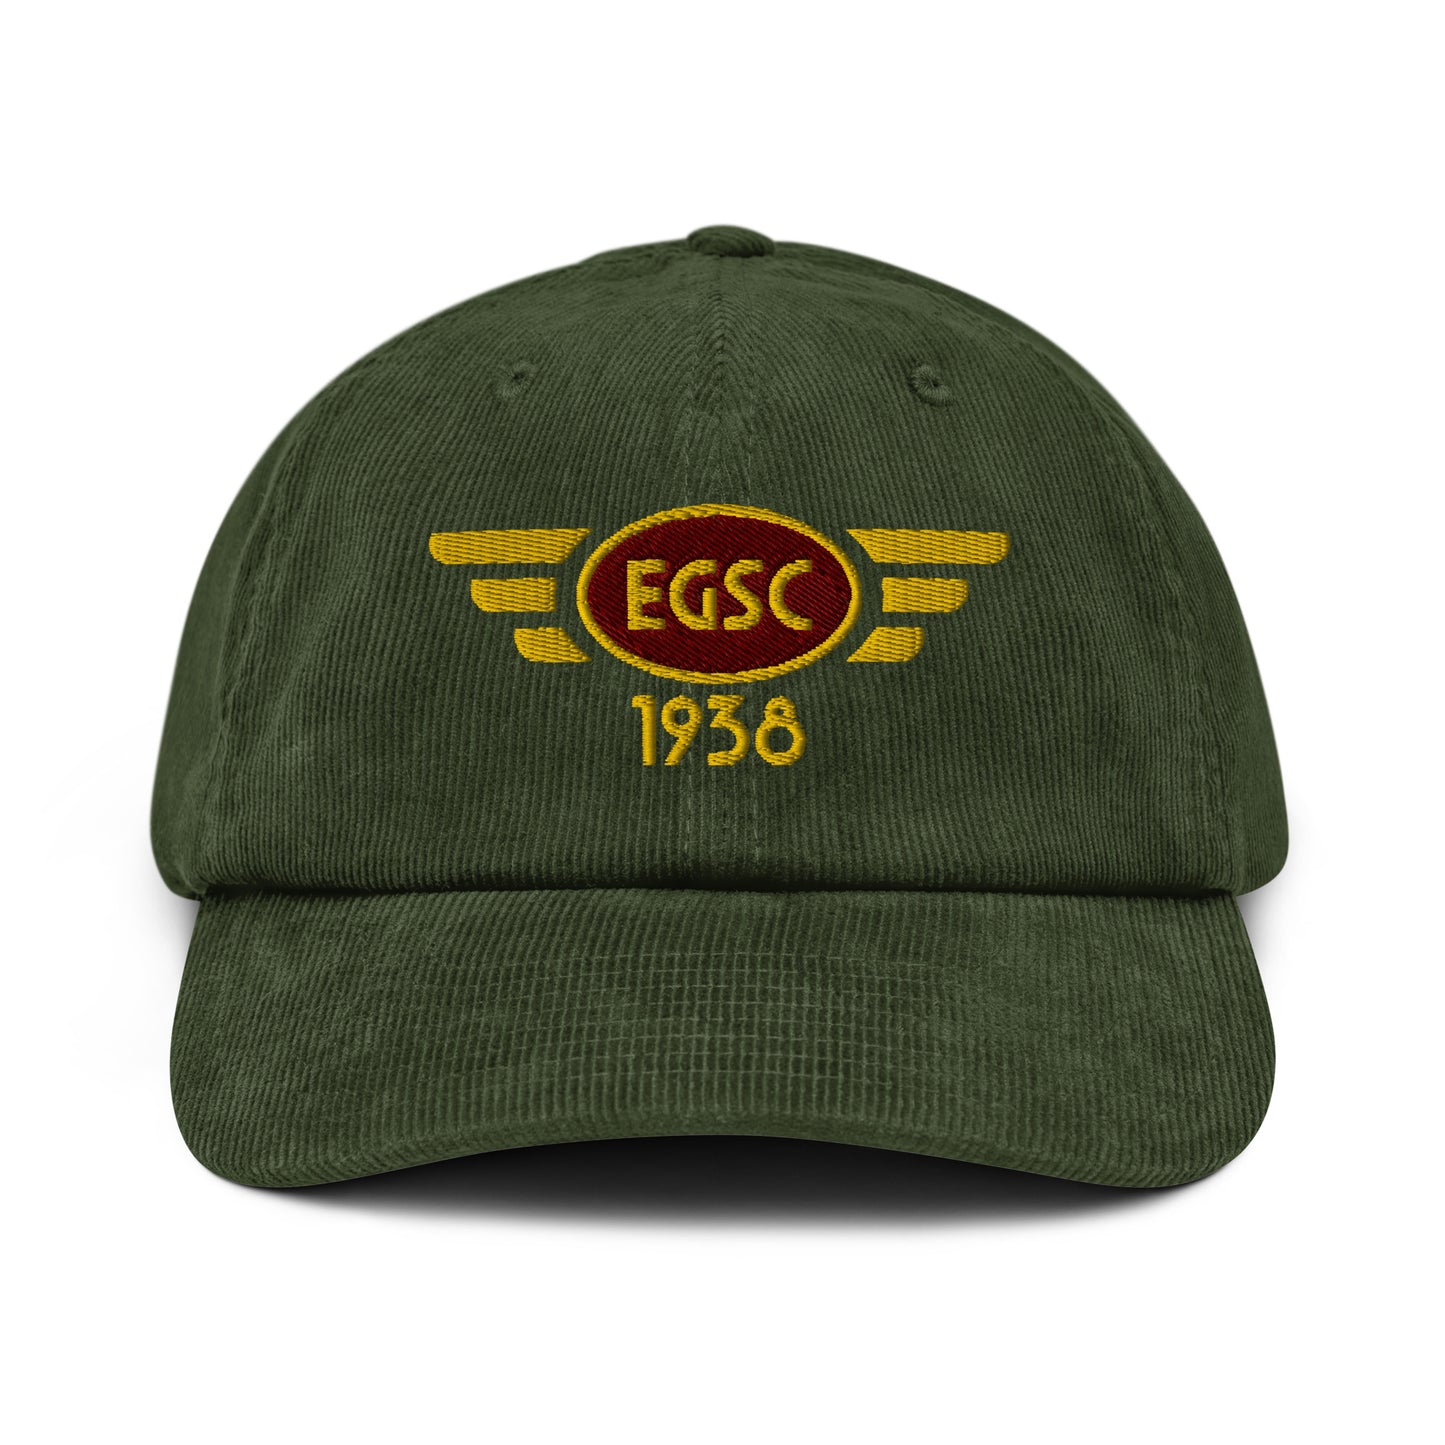 Olive coloured corduroy baseball cap with embroidered vintage style aviation logo for Cambridge Airport.